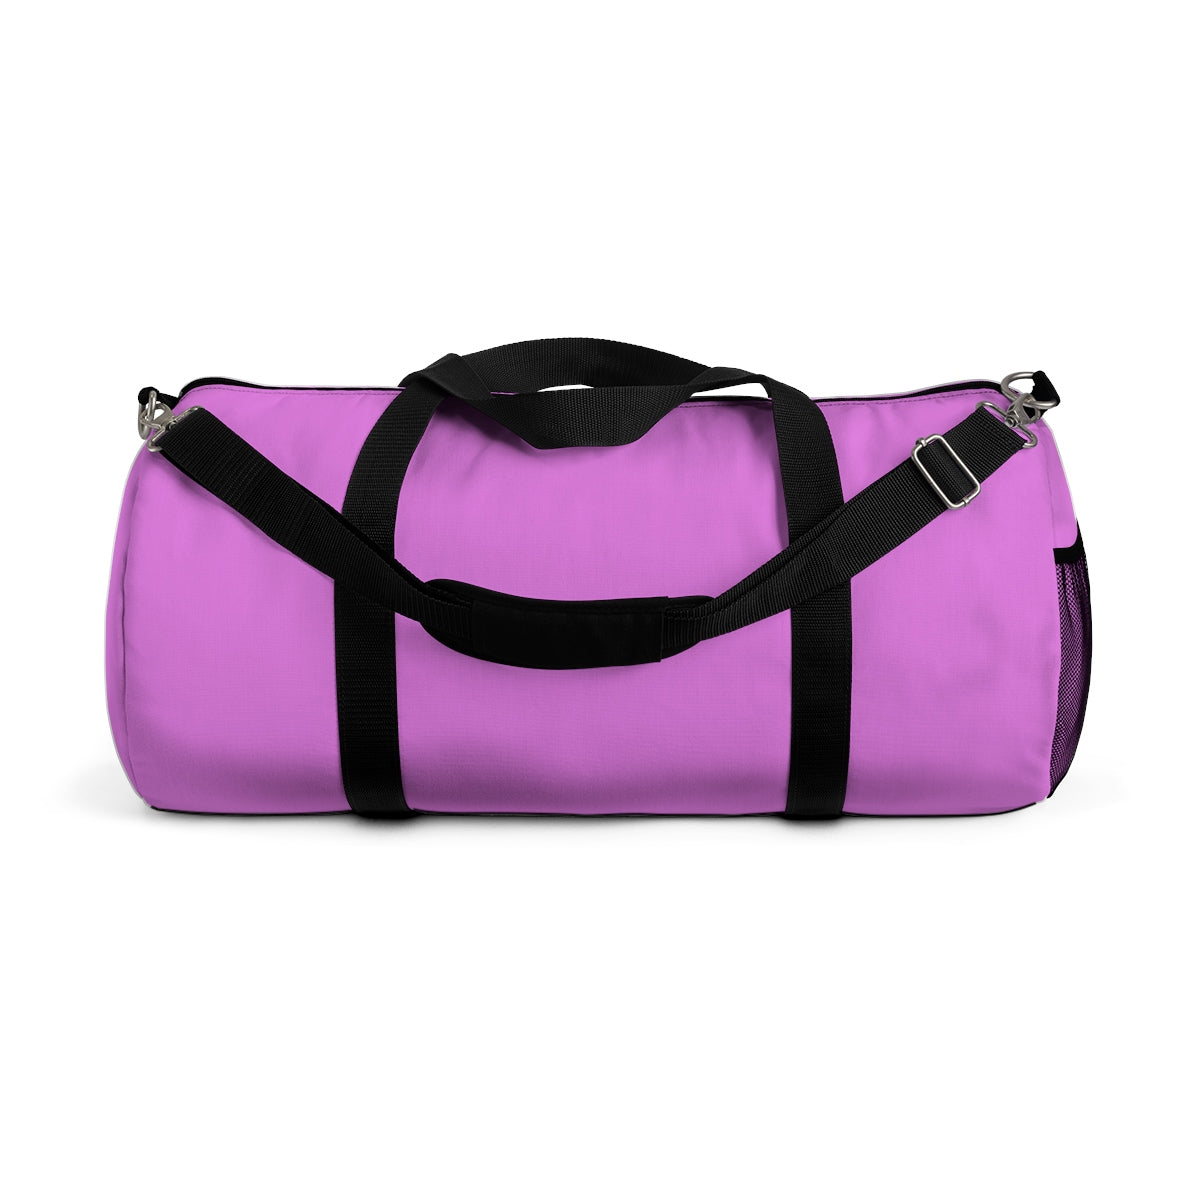 Solid Pink Color All Day Small 20"Long Or Large 23"Long Size Duffel Bag-Duffel Bag-Small-Heidi Kimura Art LLCPink Unisex Duffle Bag, Solid Pink Color All Day Small 20"Long Or Large 23"Long Size Duffel Bag, Made in USA, Small Pink Duffle Bag, Pink Duffle Bag, Pink Sports Duffle Bag Travel Luggage